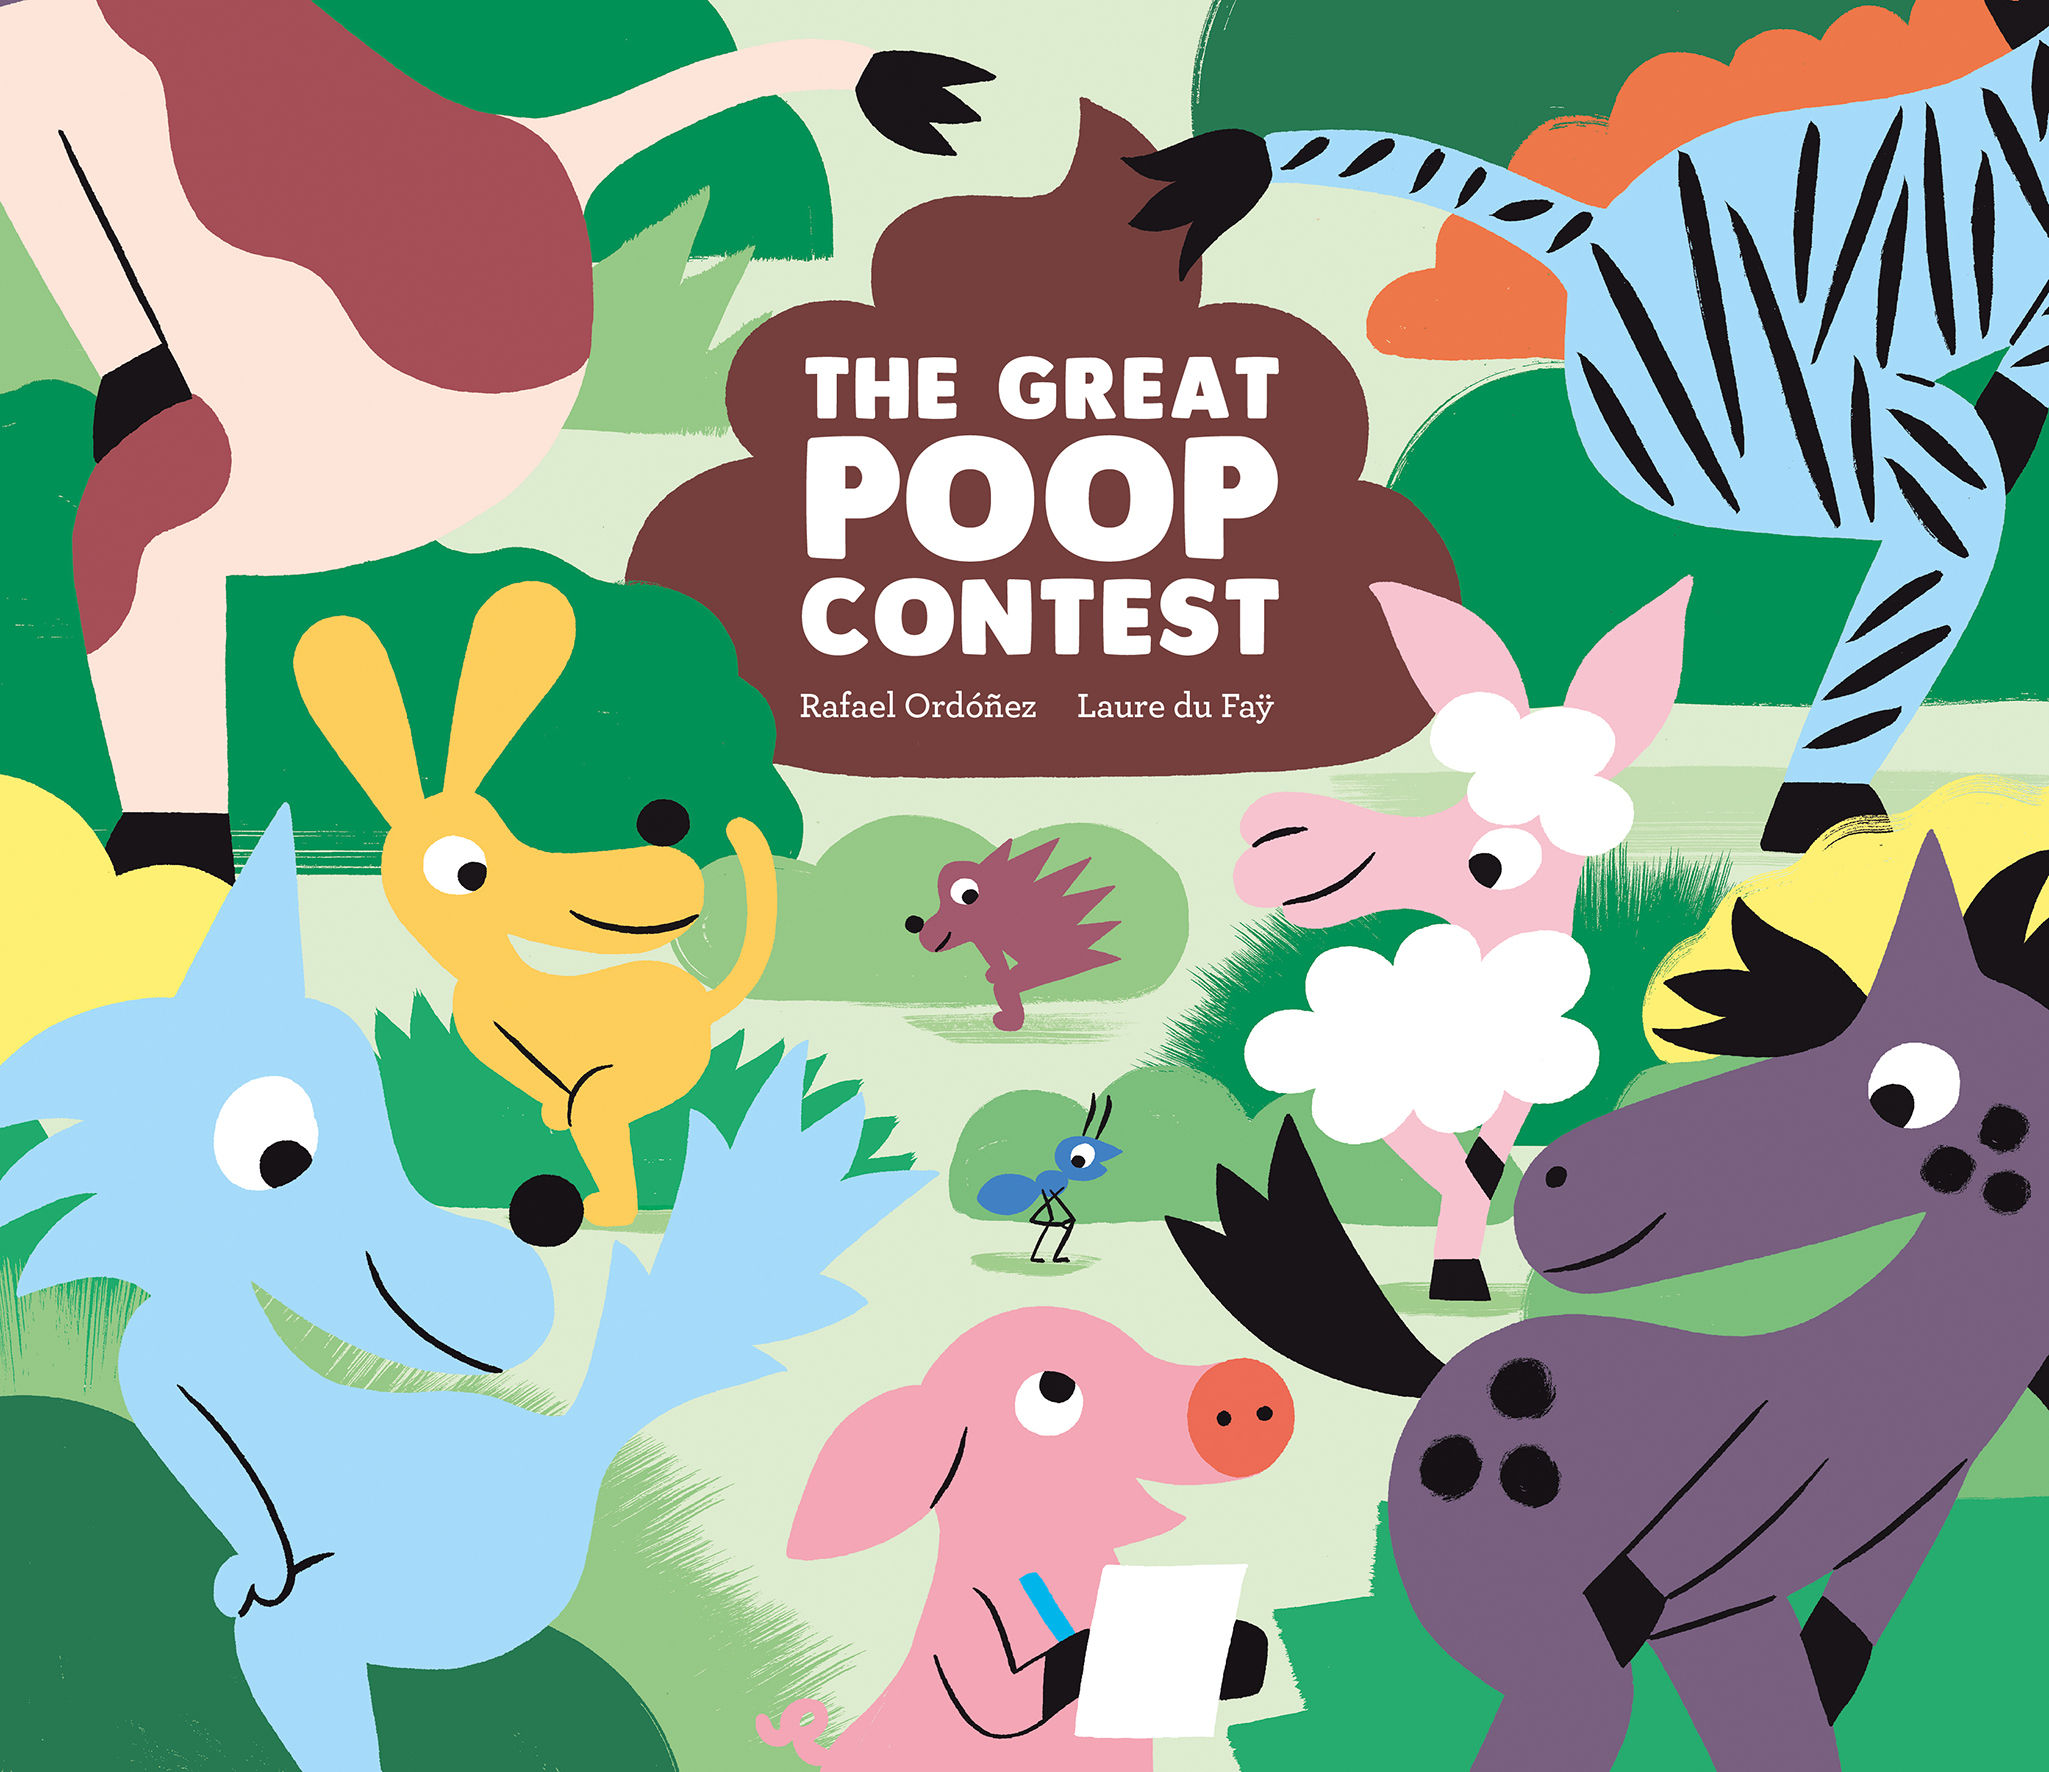 THE GREAT POOP CONTEST